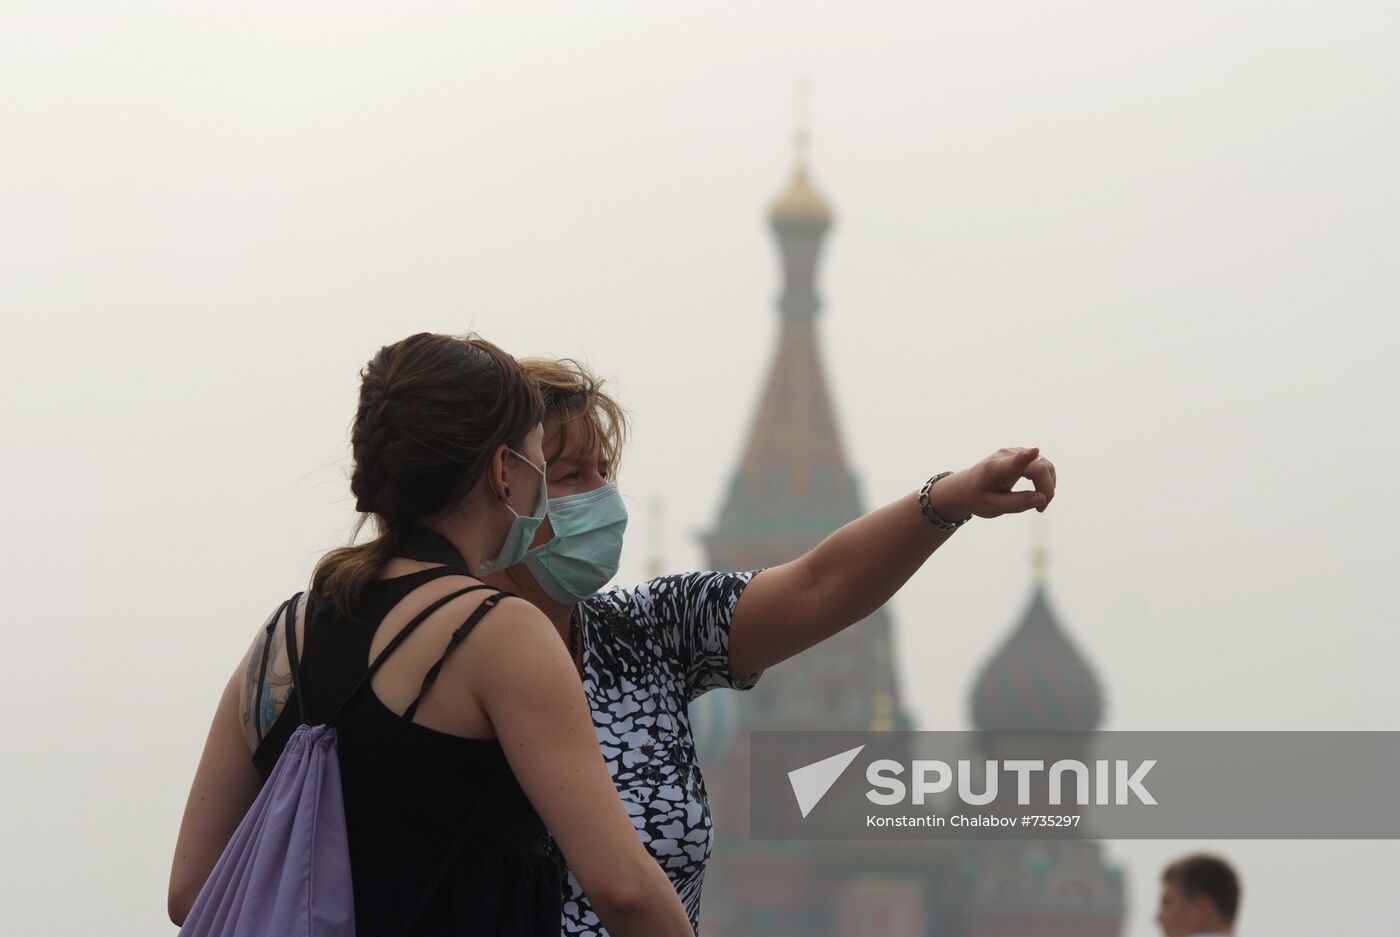 Moscow engulfed by wildfire smoke